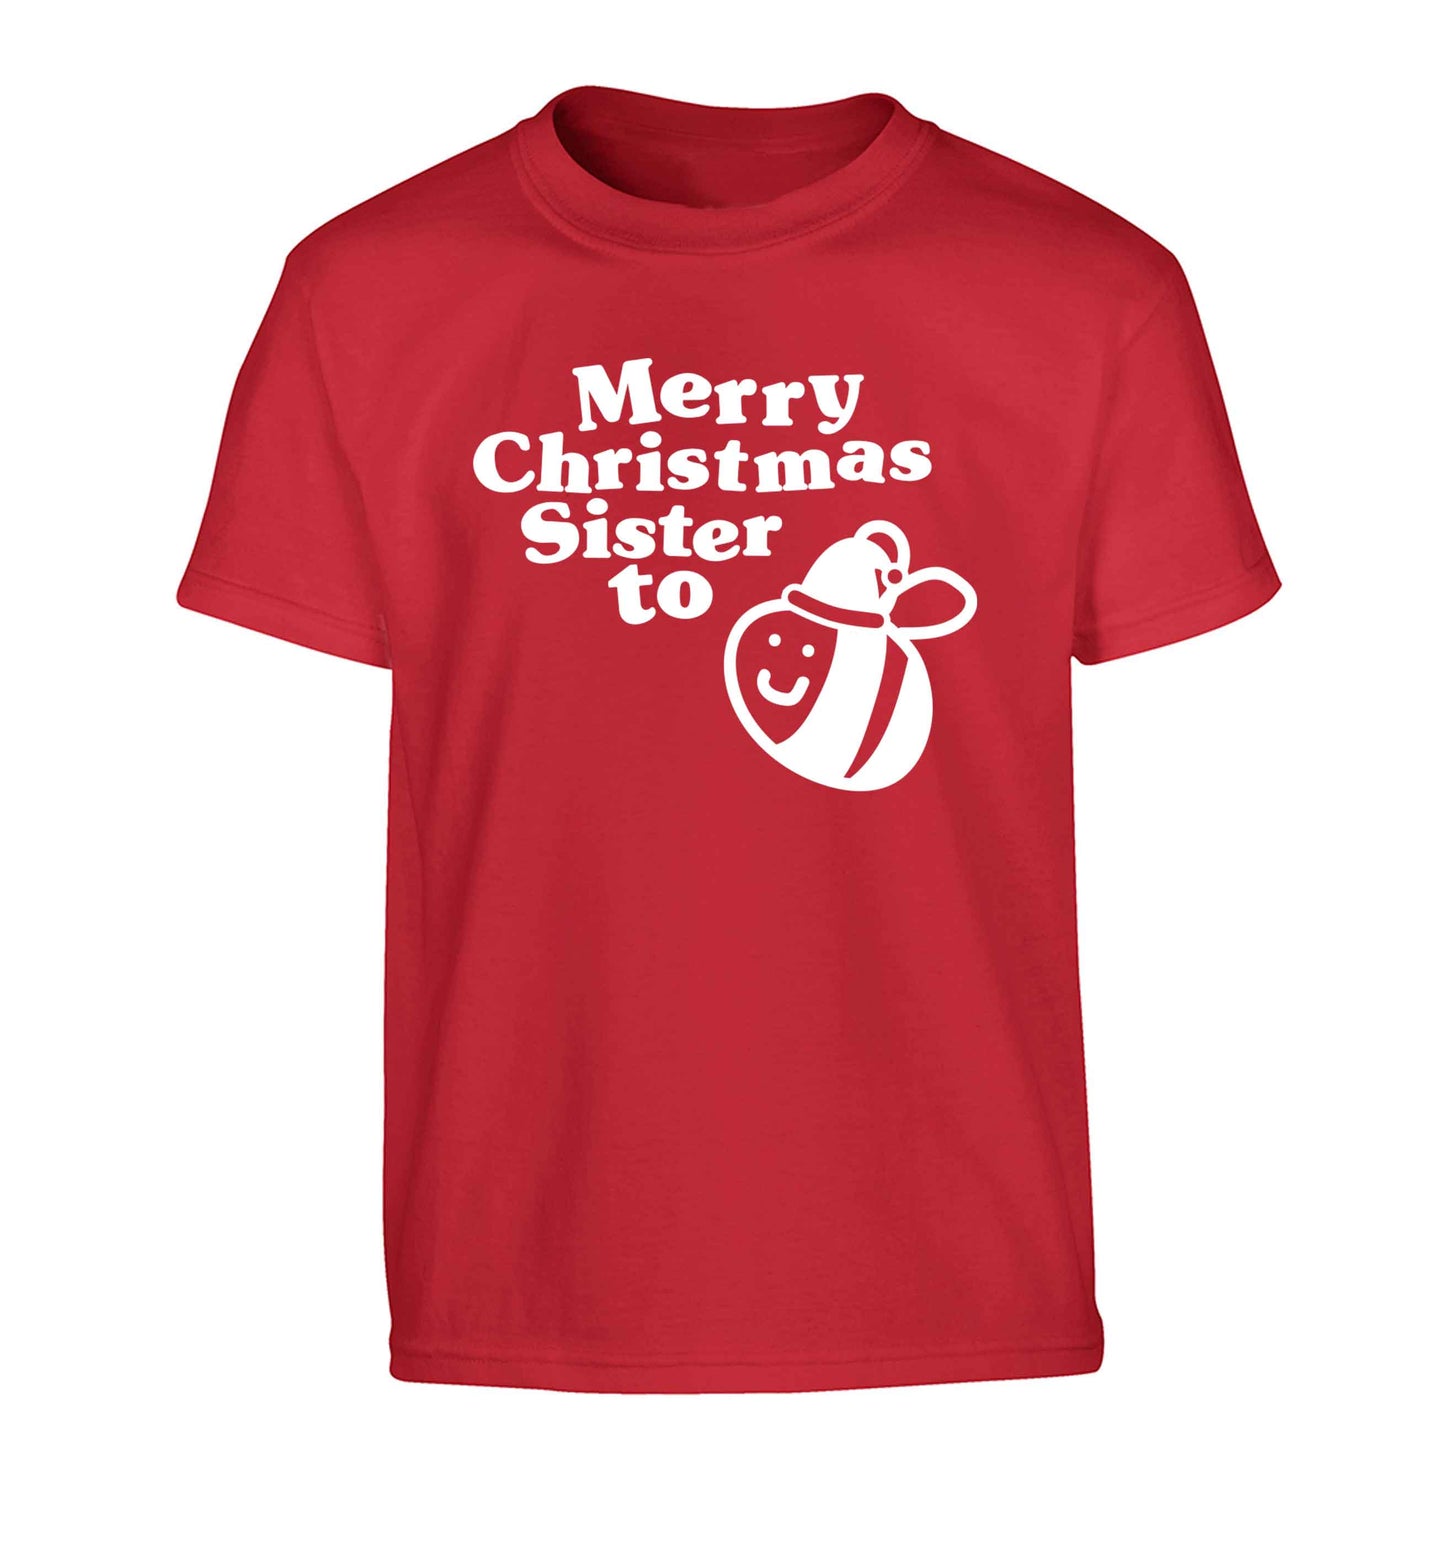 Merry Christmas sister to be Children's red Tshirt 12-13 Years